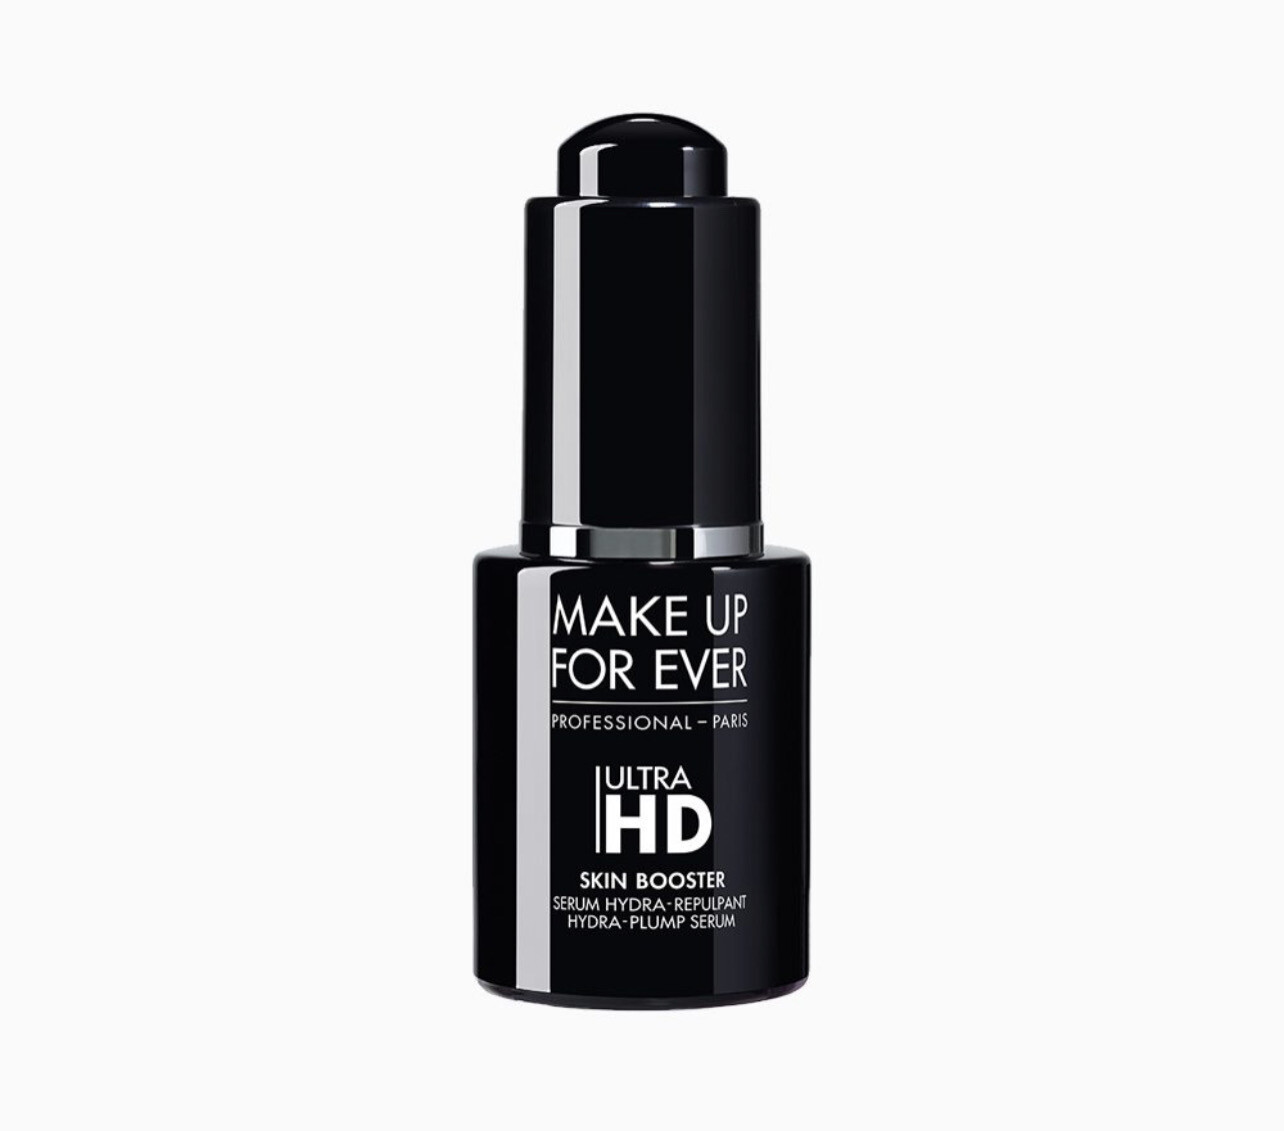 Make Up For Ever - Ultra HD Skin Booster